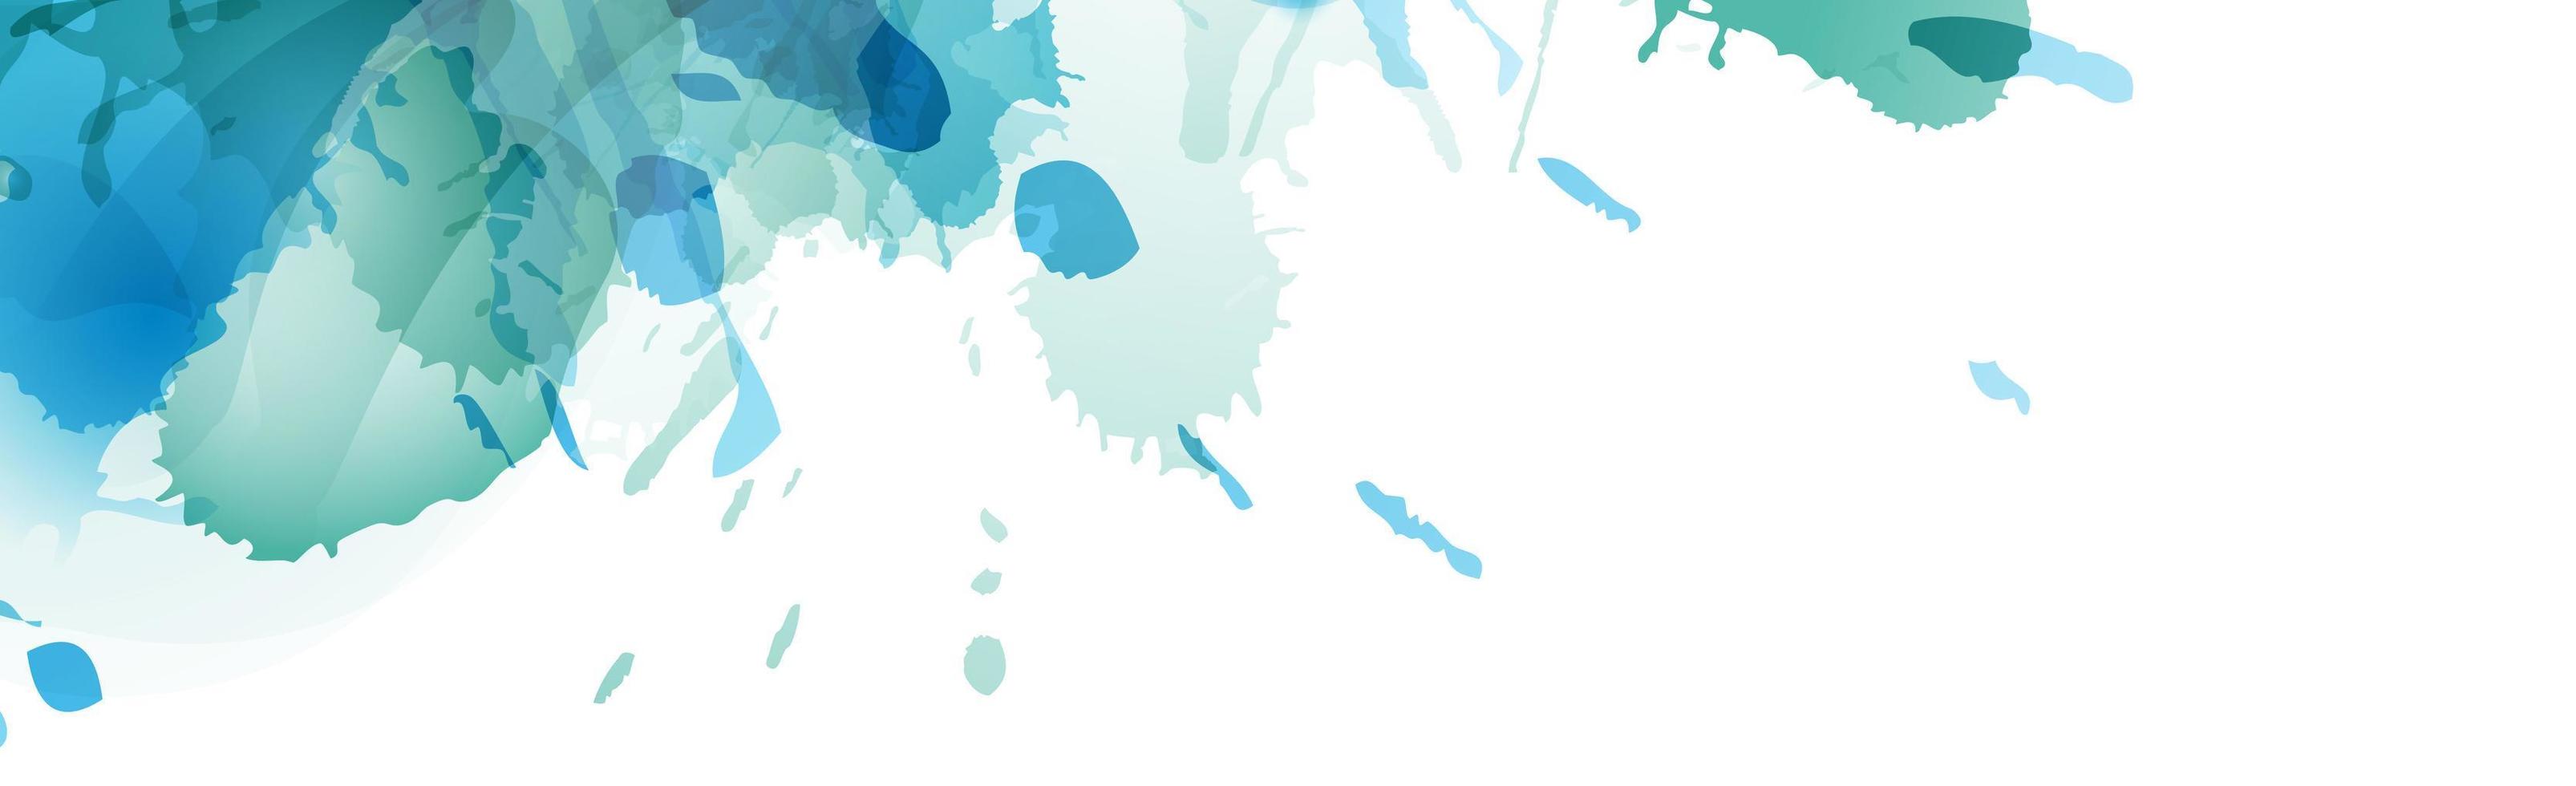 Abstract panoramic background with watercolor stains tone brush strokes on white background - Vector